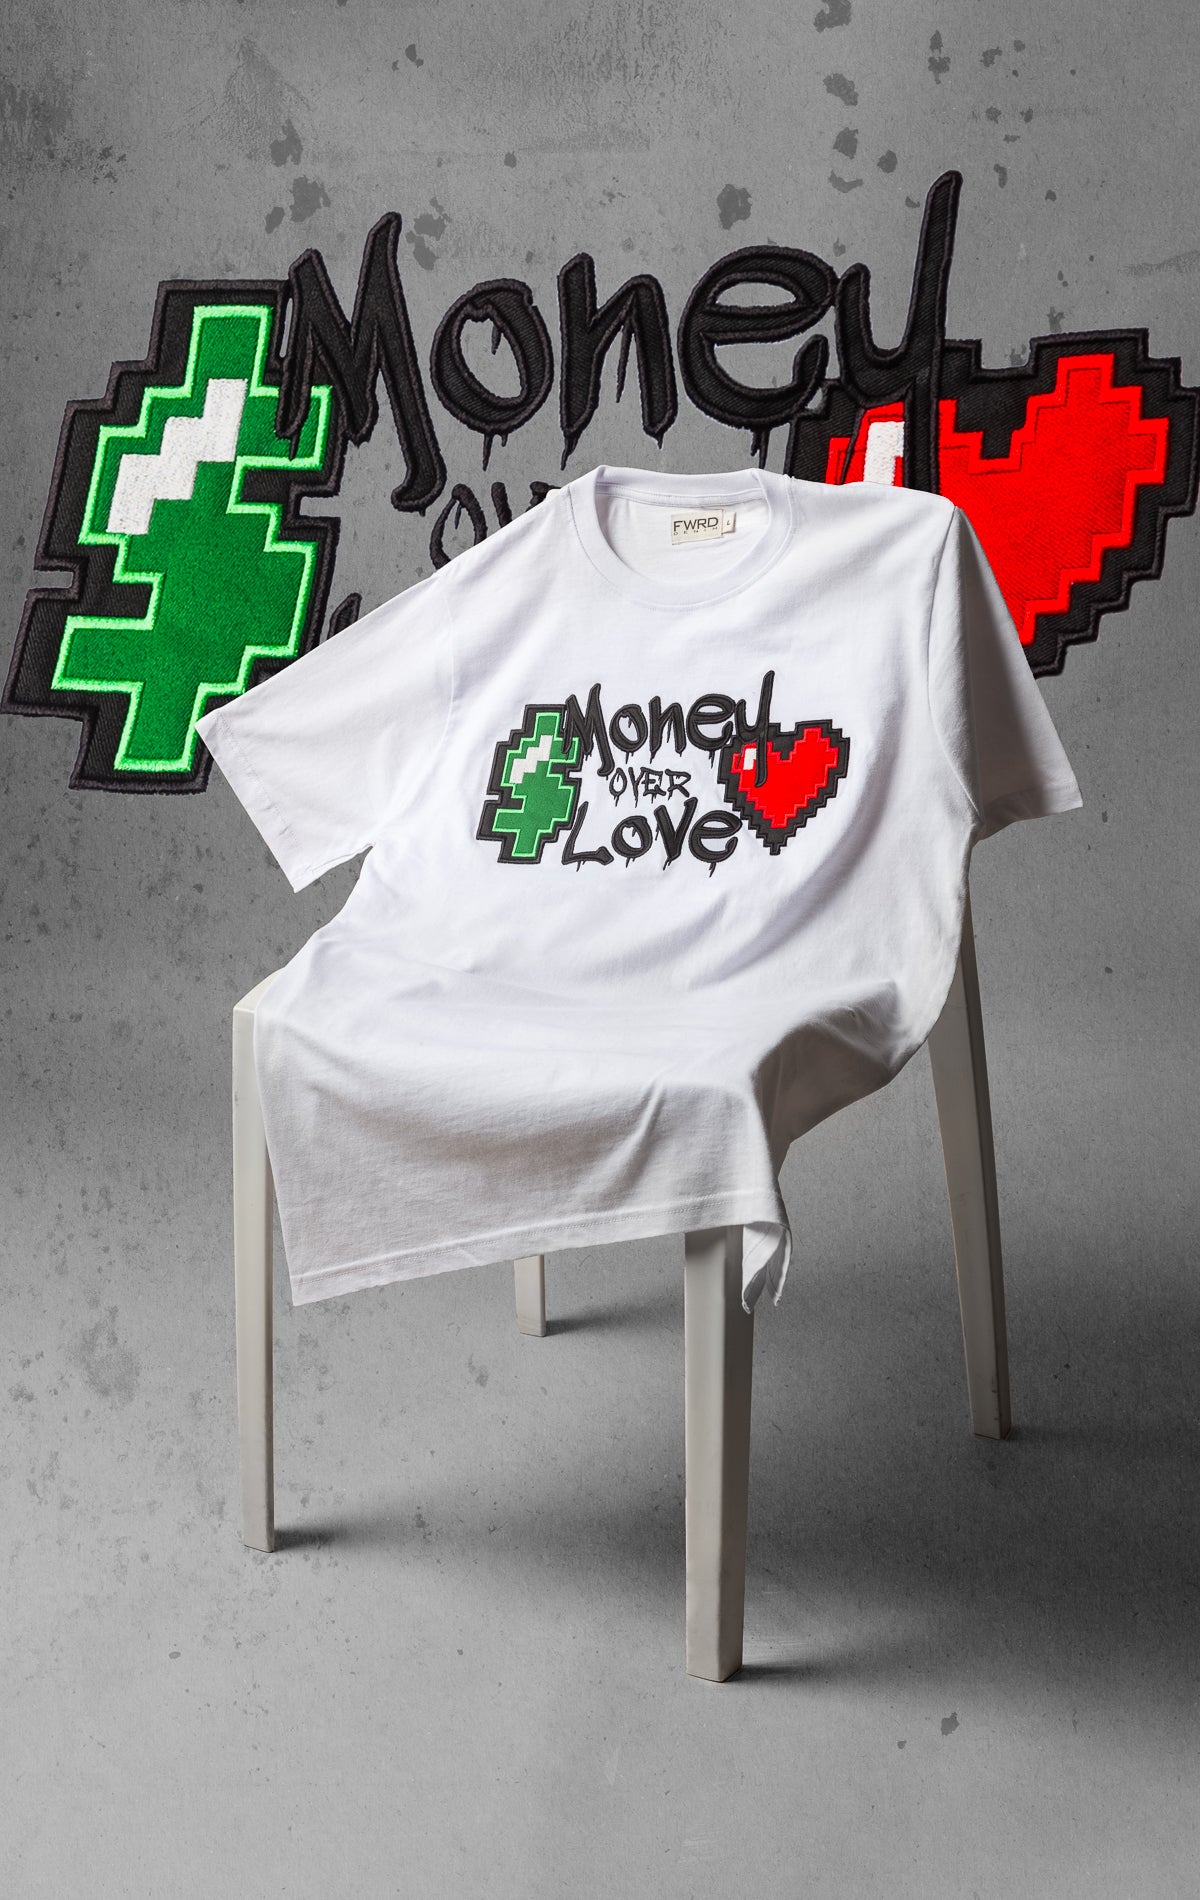 White t shirt with "Money over love" graphic